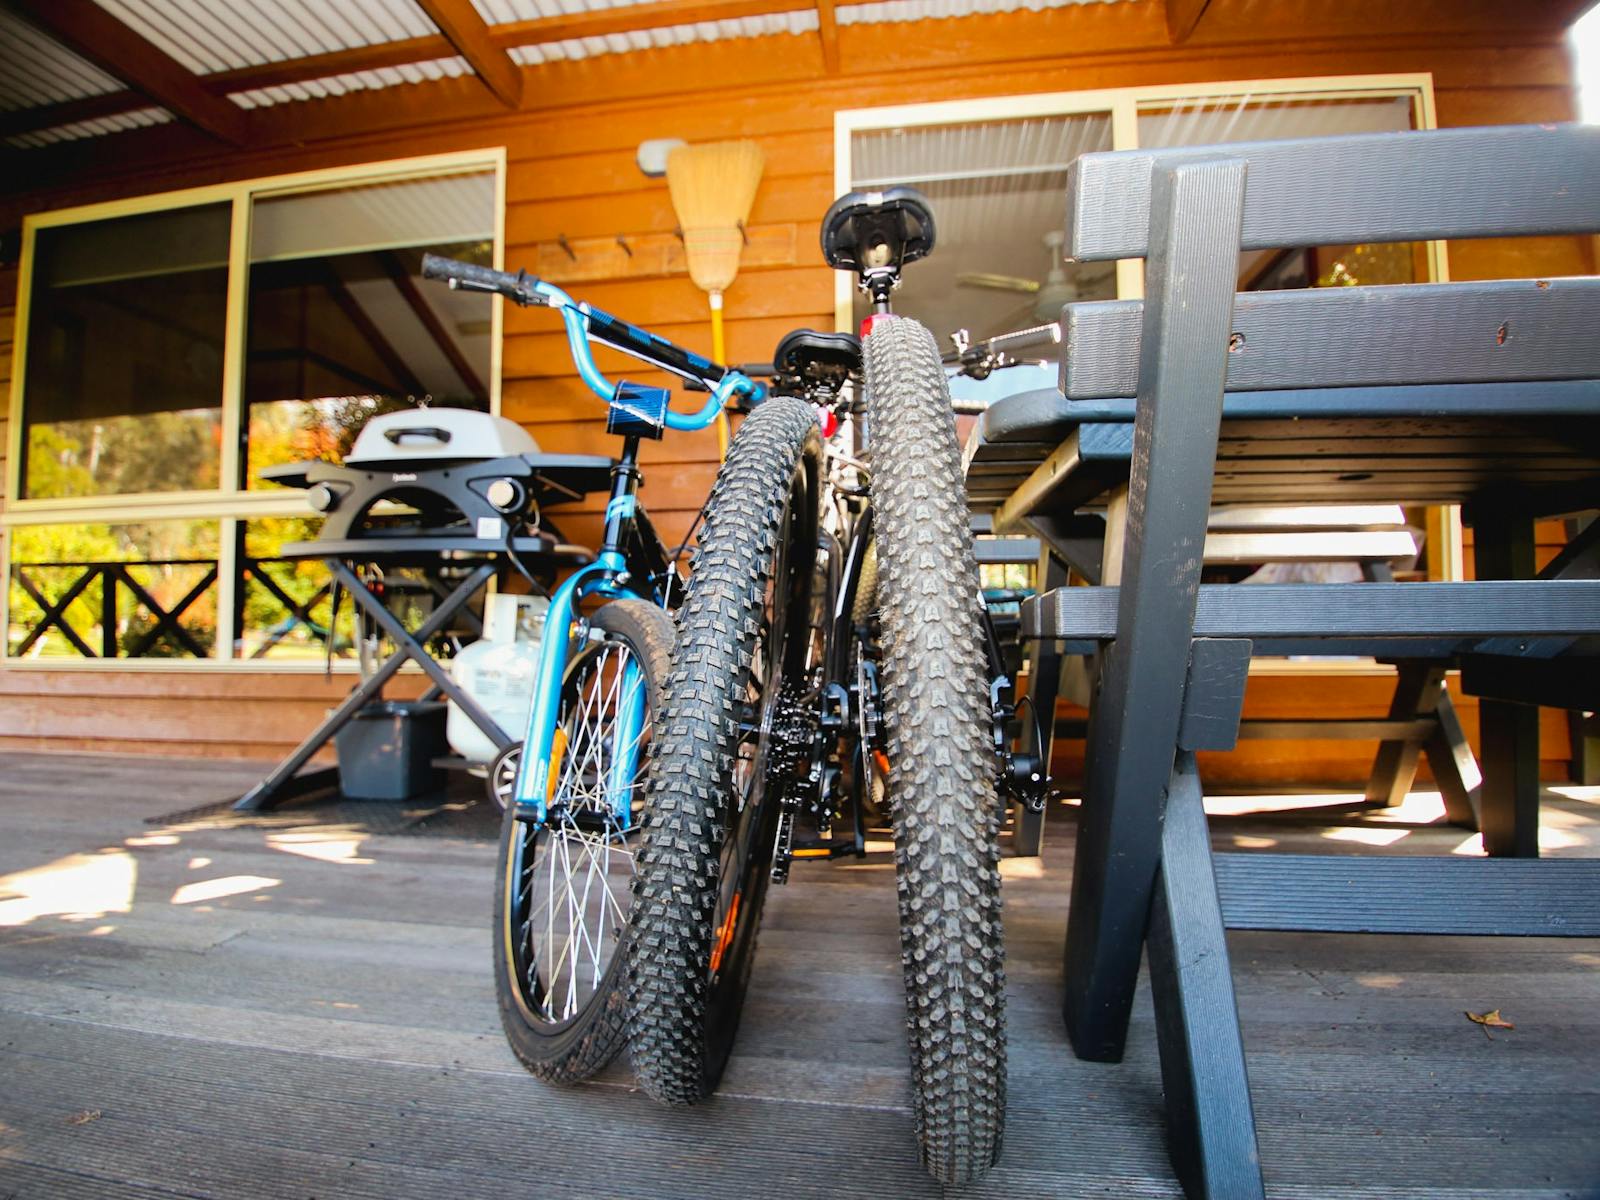 Image of veranda of Cabin with BBQ and guests bikes